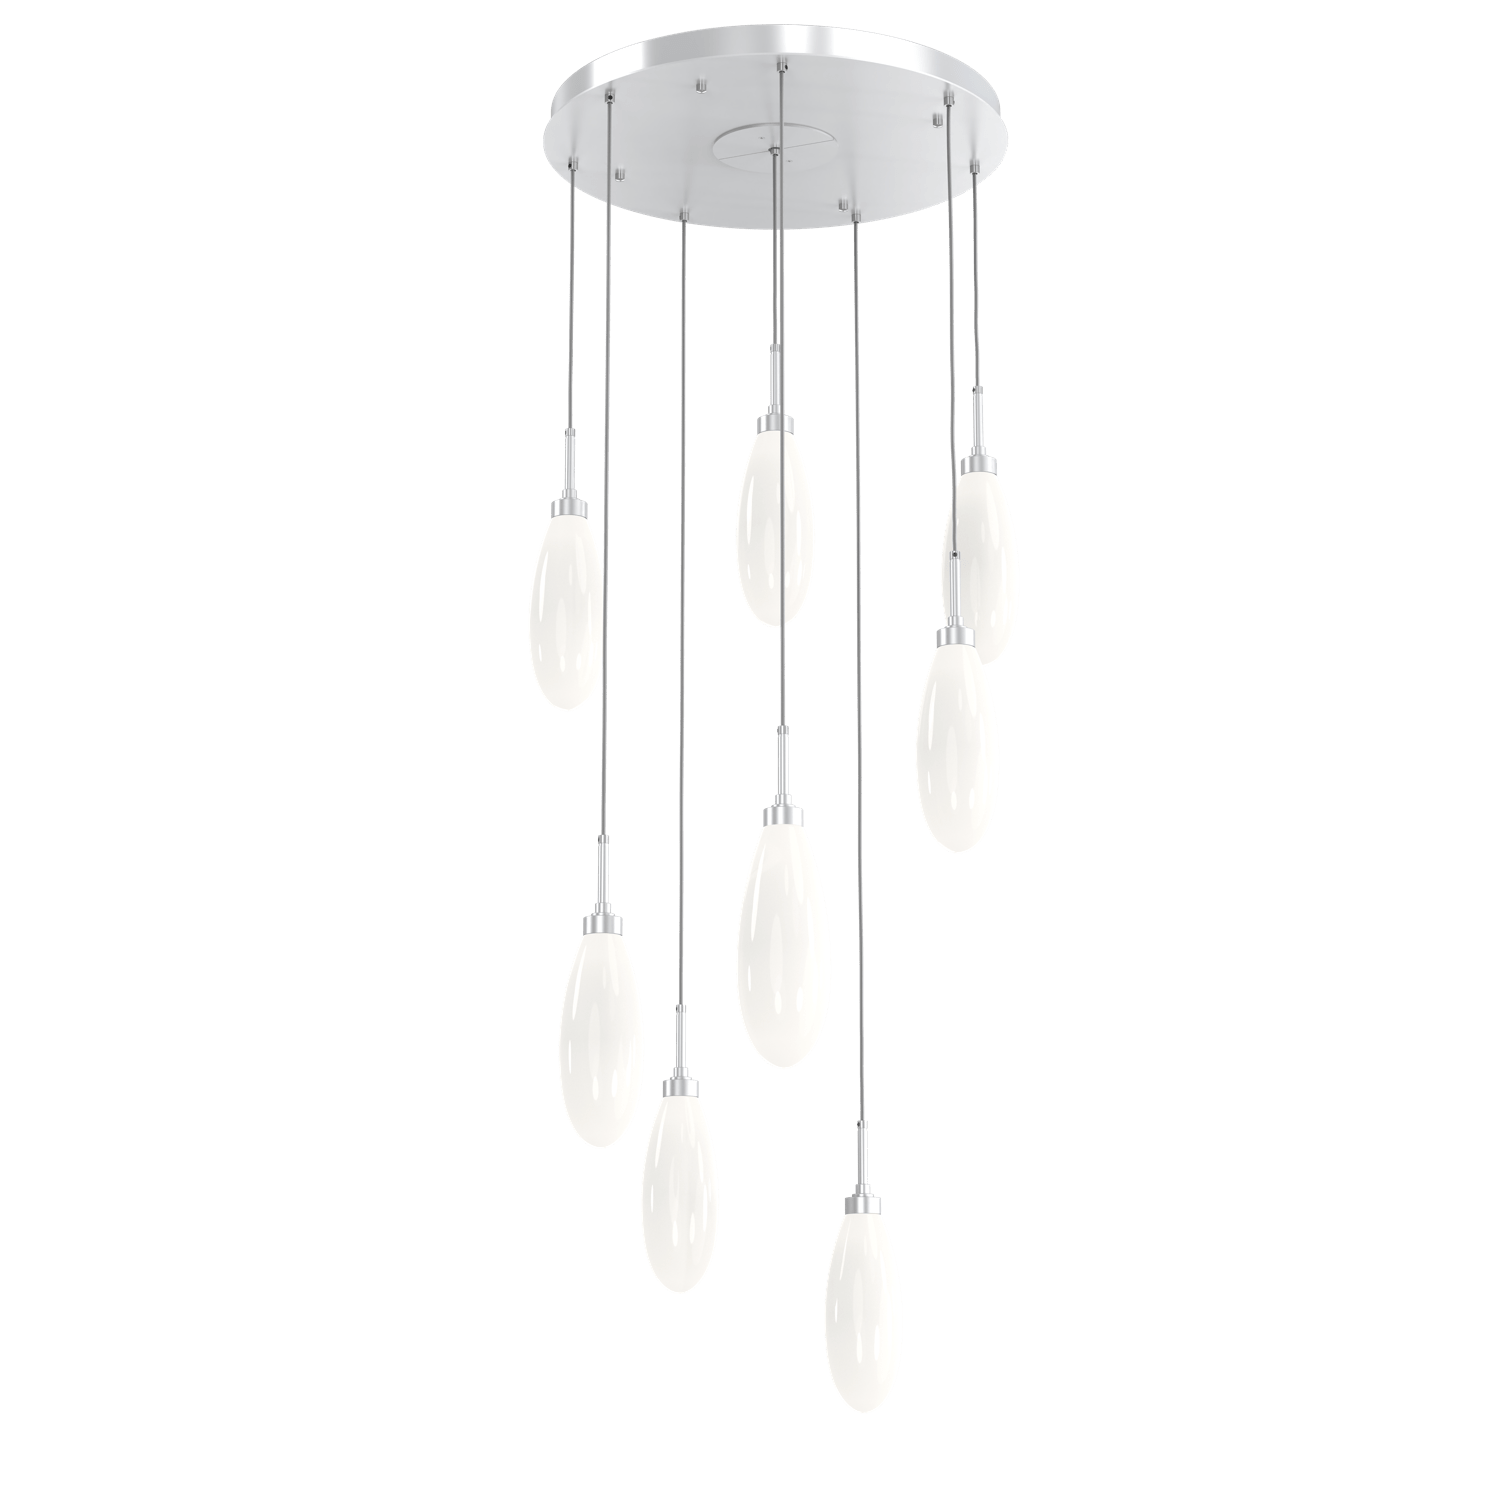 CHB0071-08-CS-WL-LL-Hammerton-Studio-Fiori-8-light-round-pendant-chandelier-with-classic-silver-finish-and-opal-white-glass-shades-and-LED-lamping